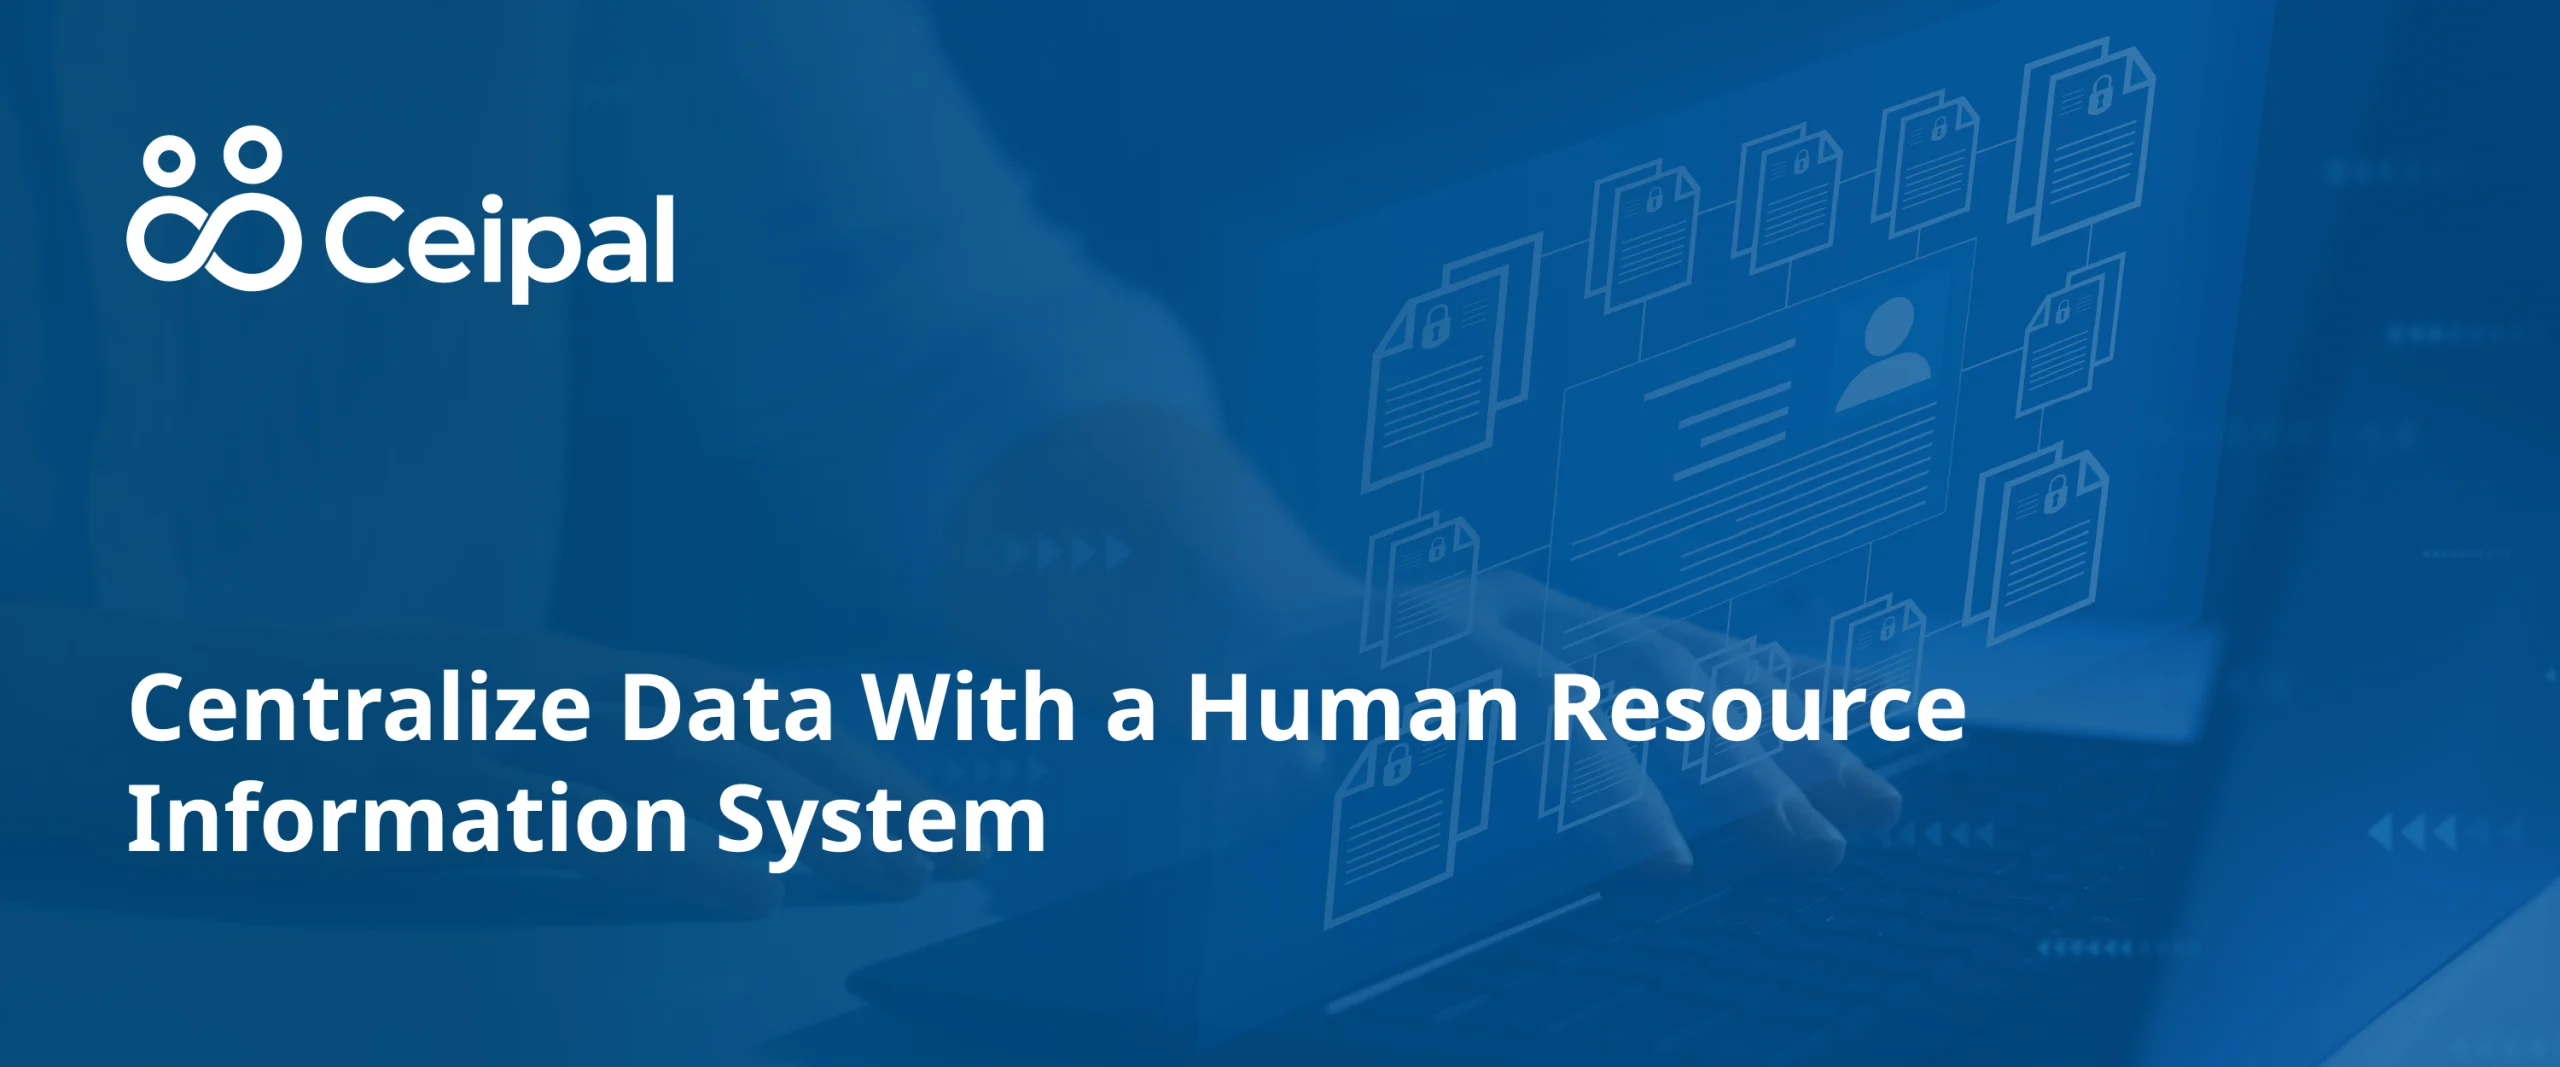 Centralize HR Data With a Human Resources Information System